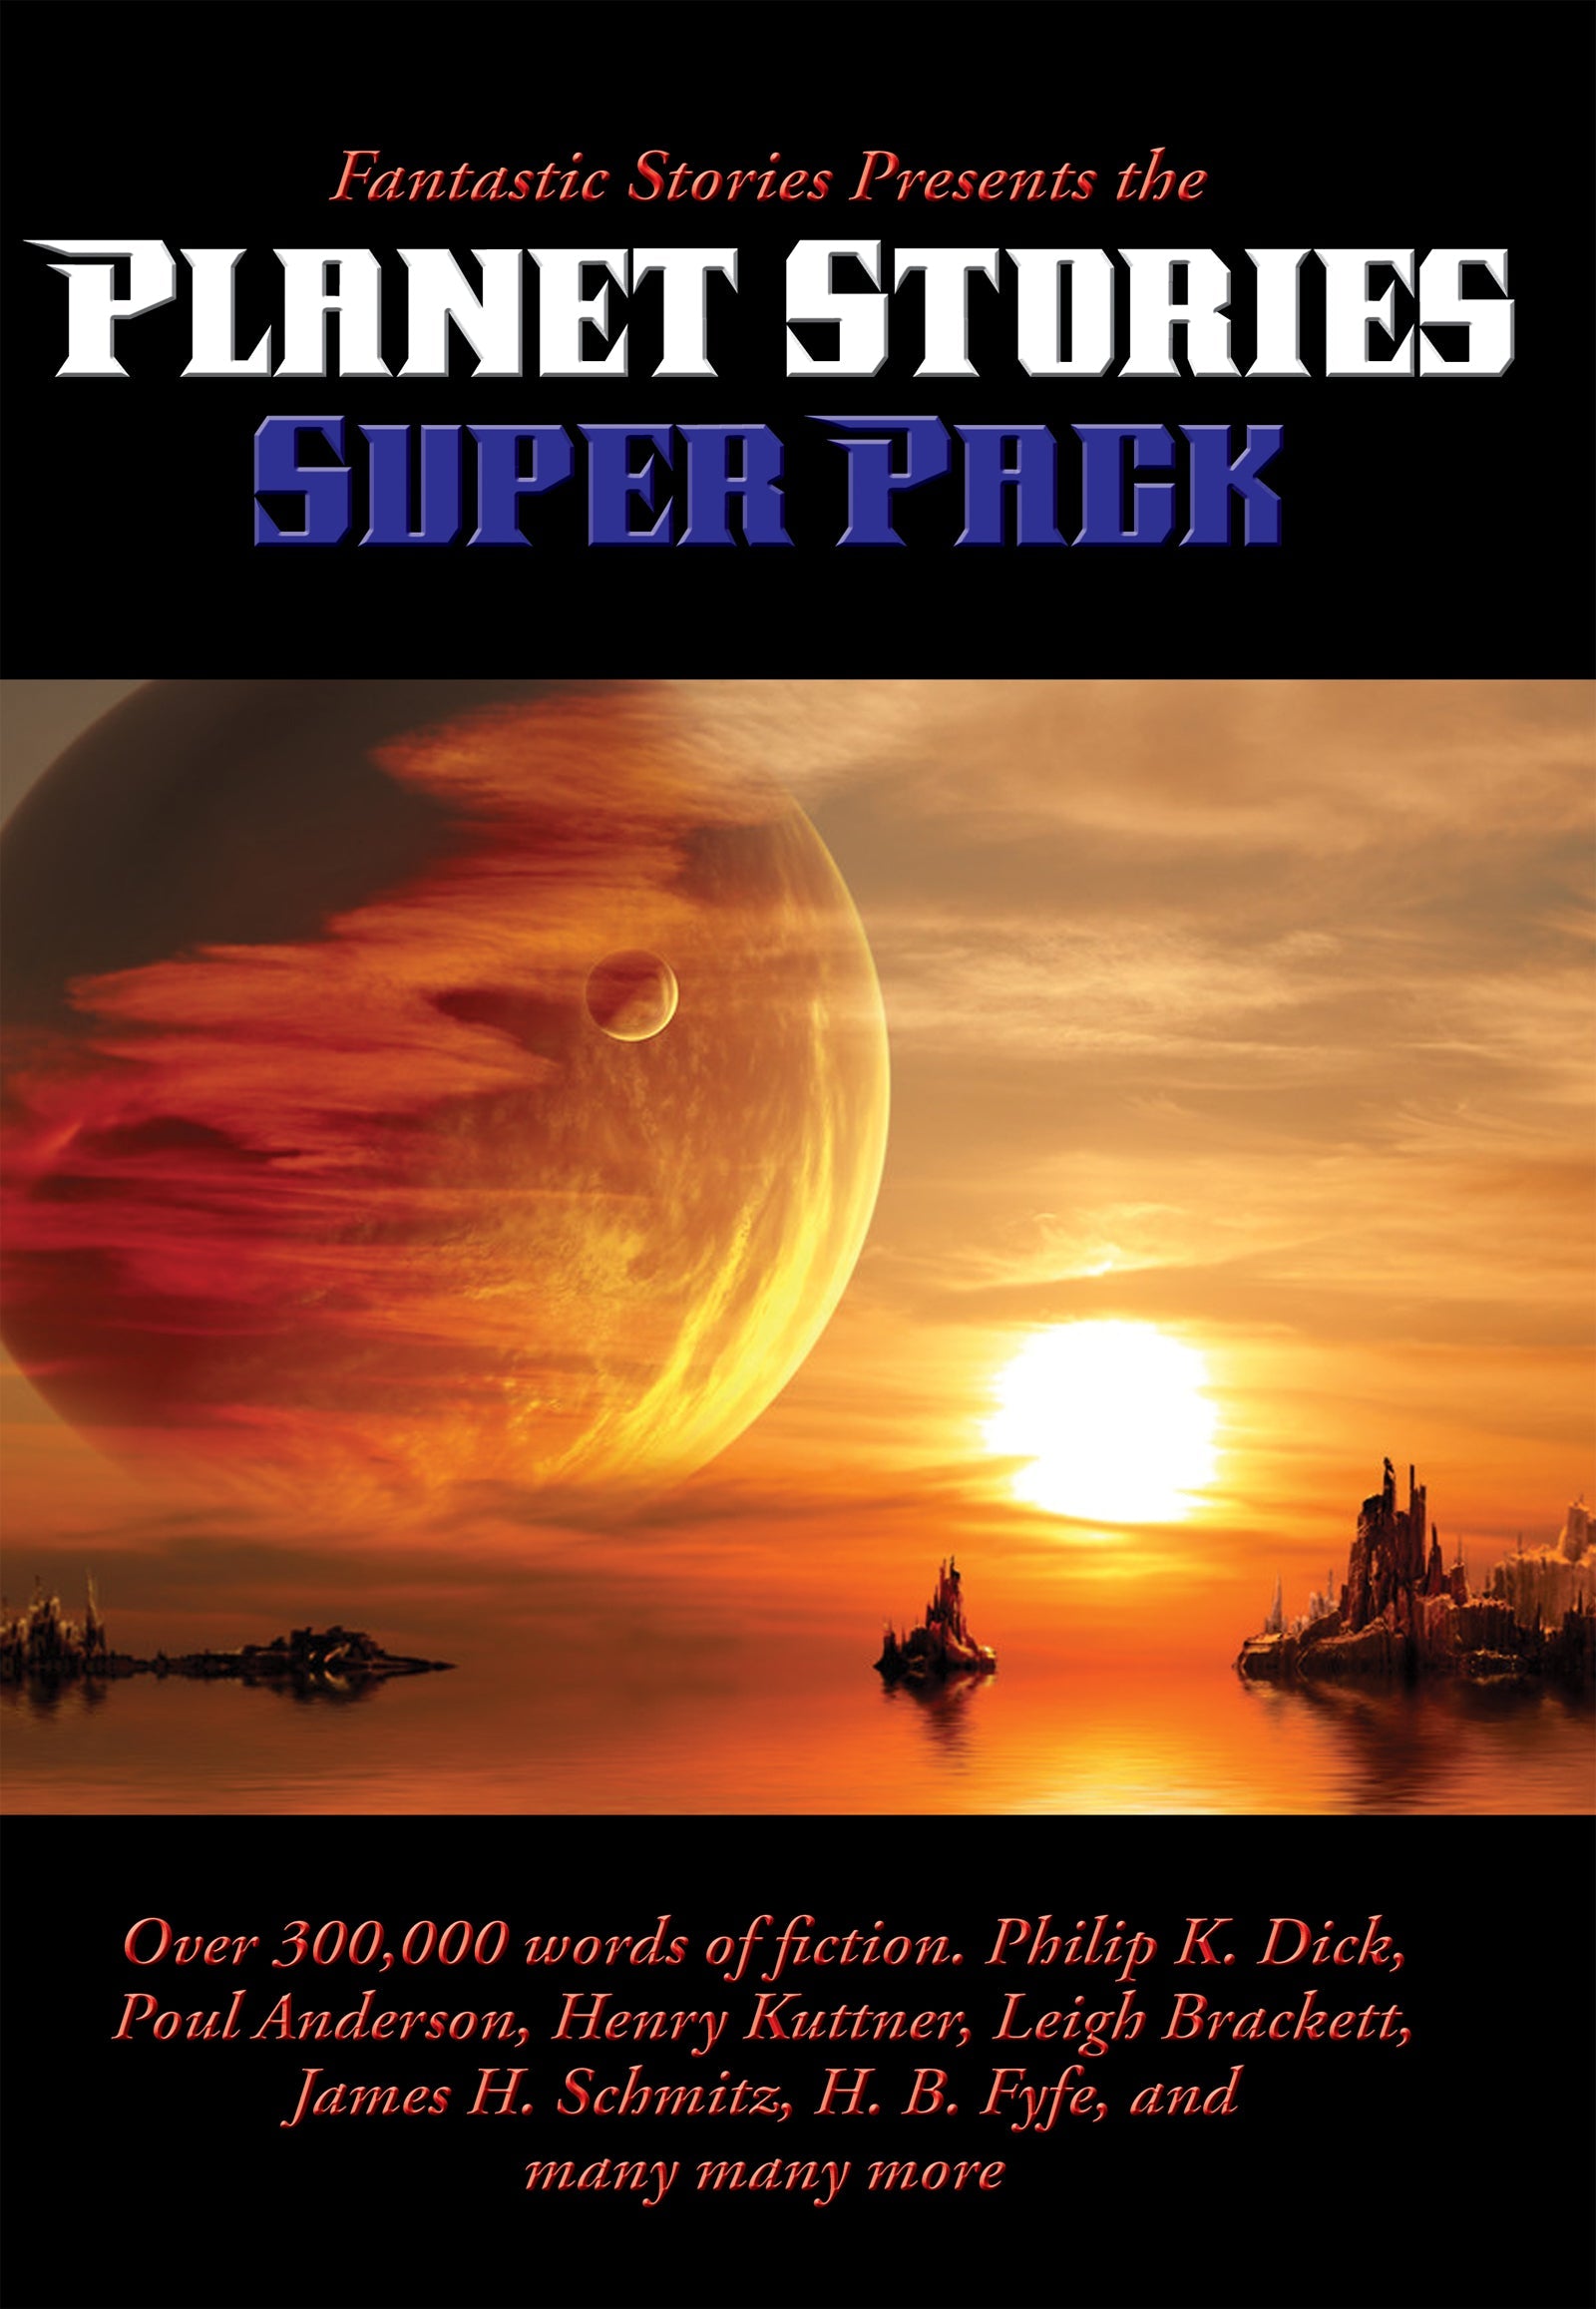 Cover art for Positronic Super Pack #28, the first Planet Stories Super Pack.